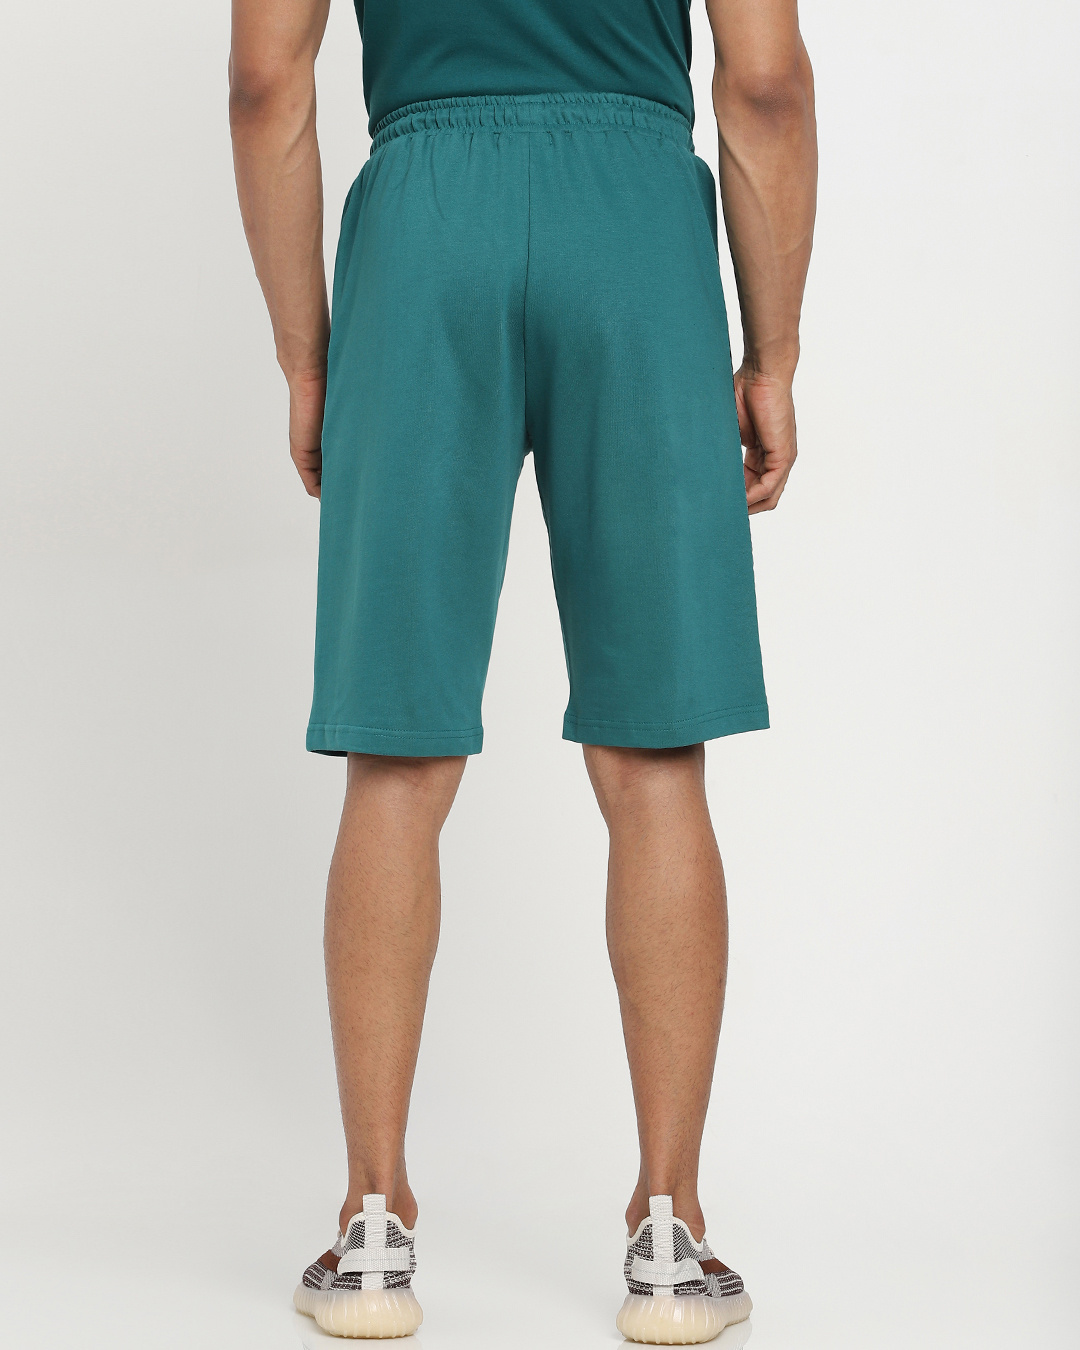 Shop Men's Snazzy Green Printed Shorts-Back